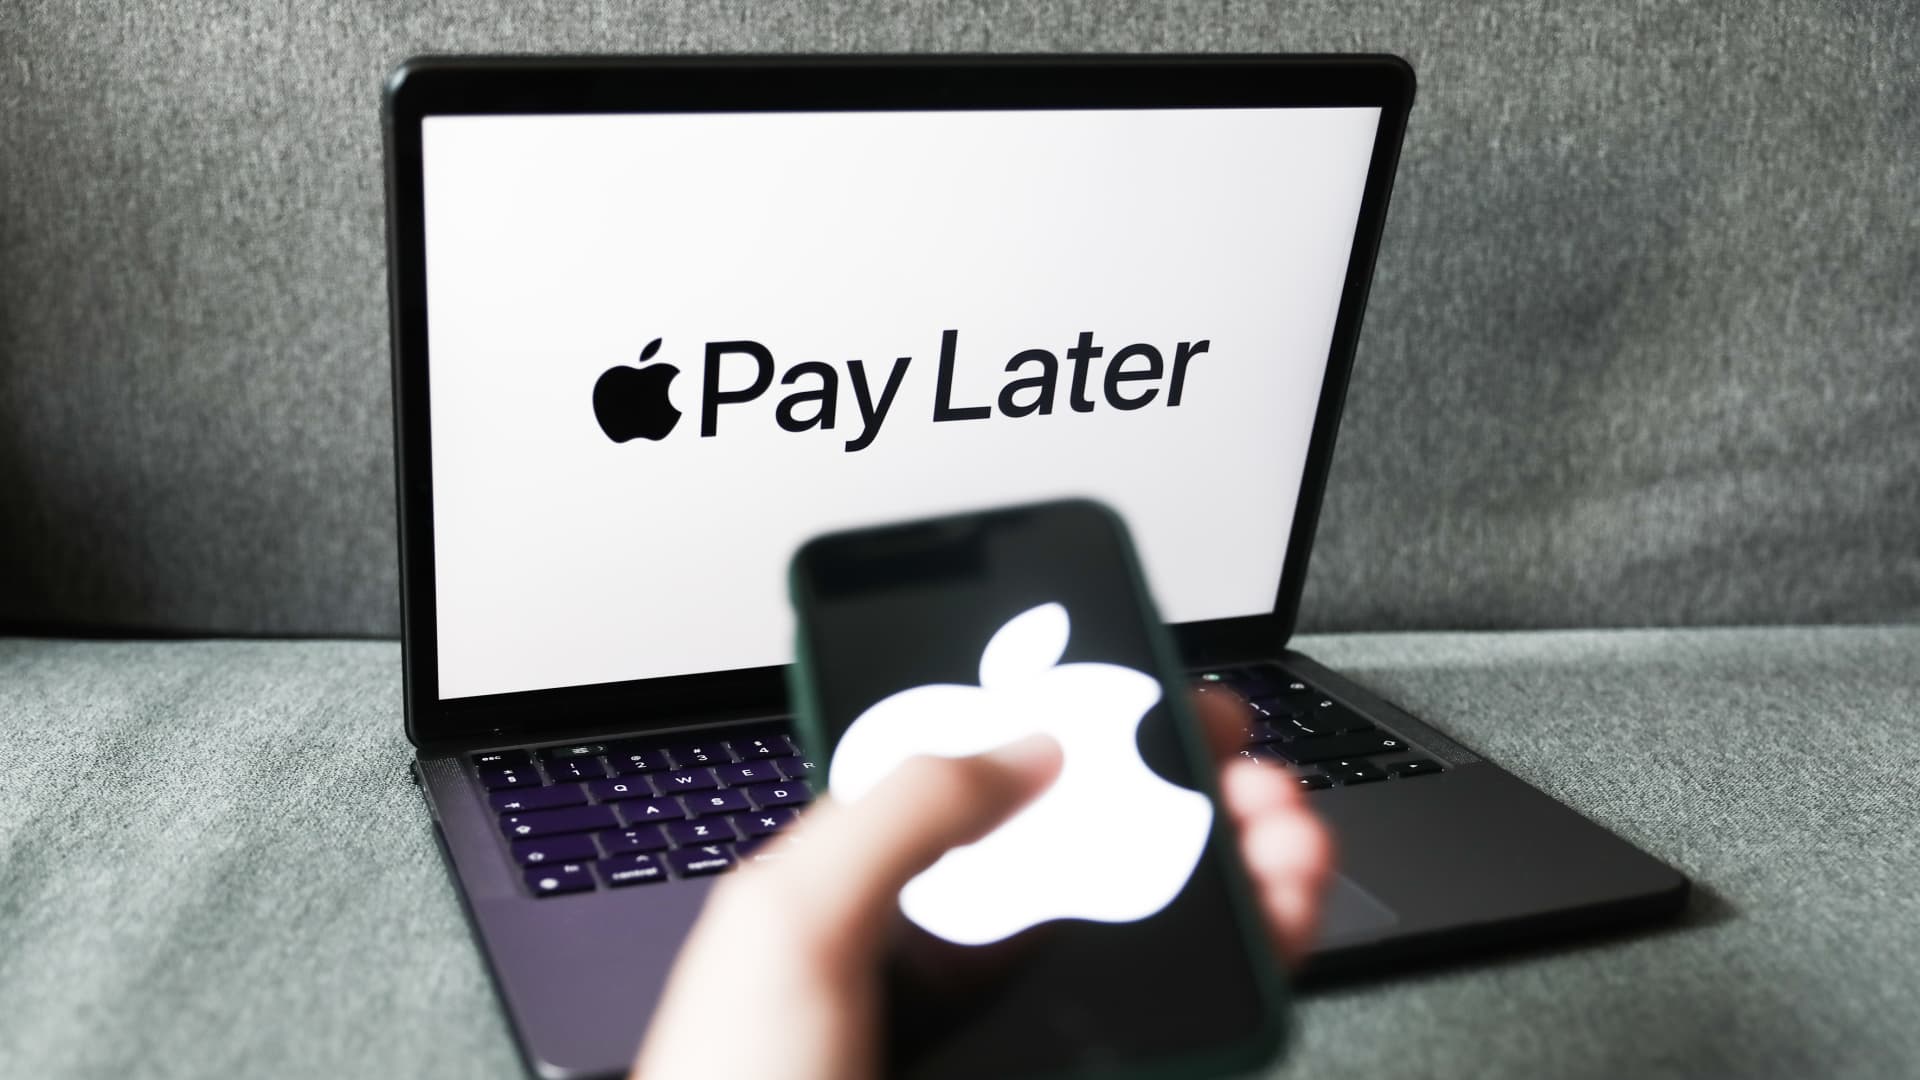 Apple’s latest fintech move has buy now, pay later industry on edge